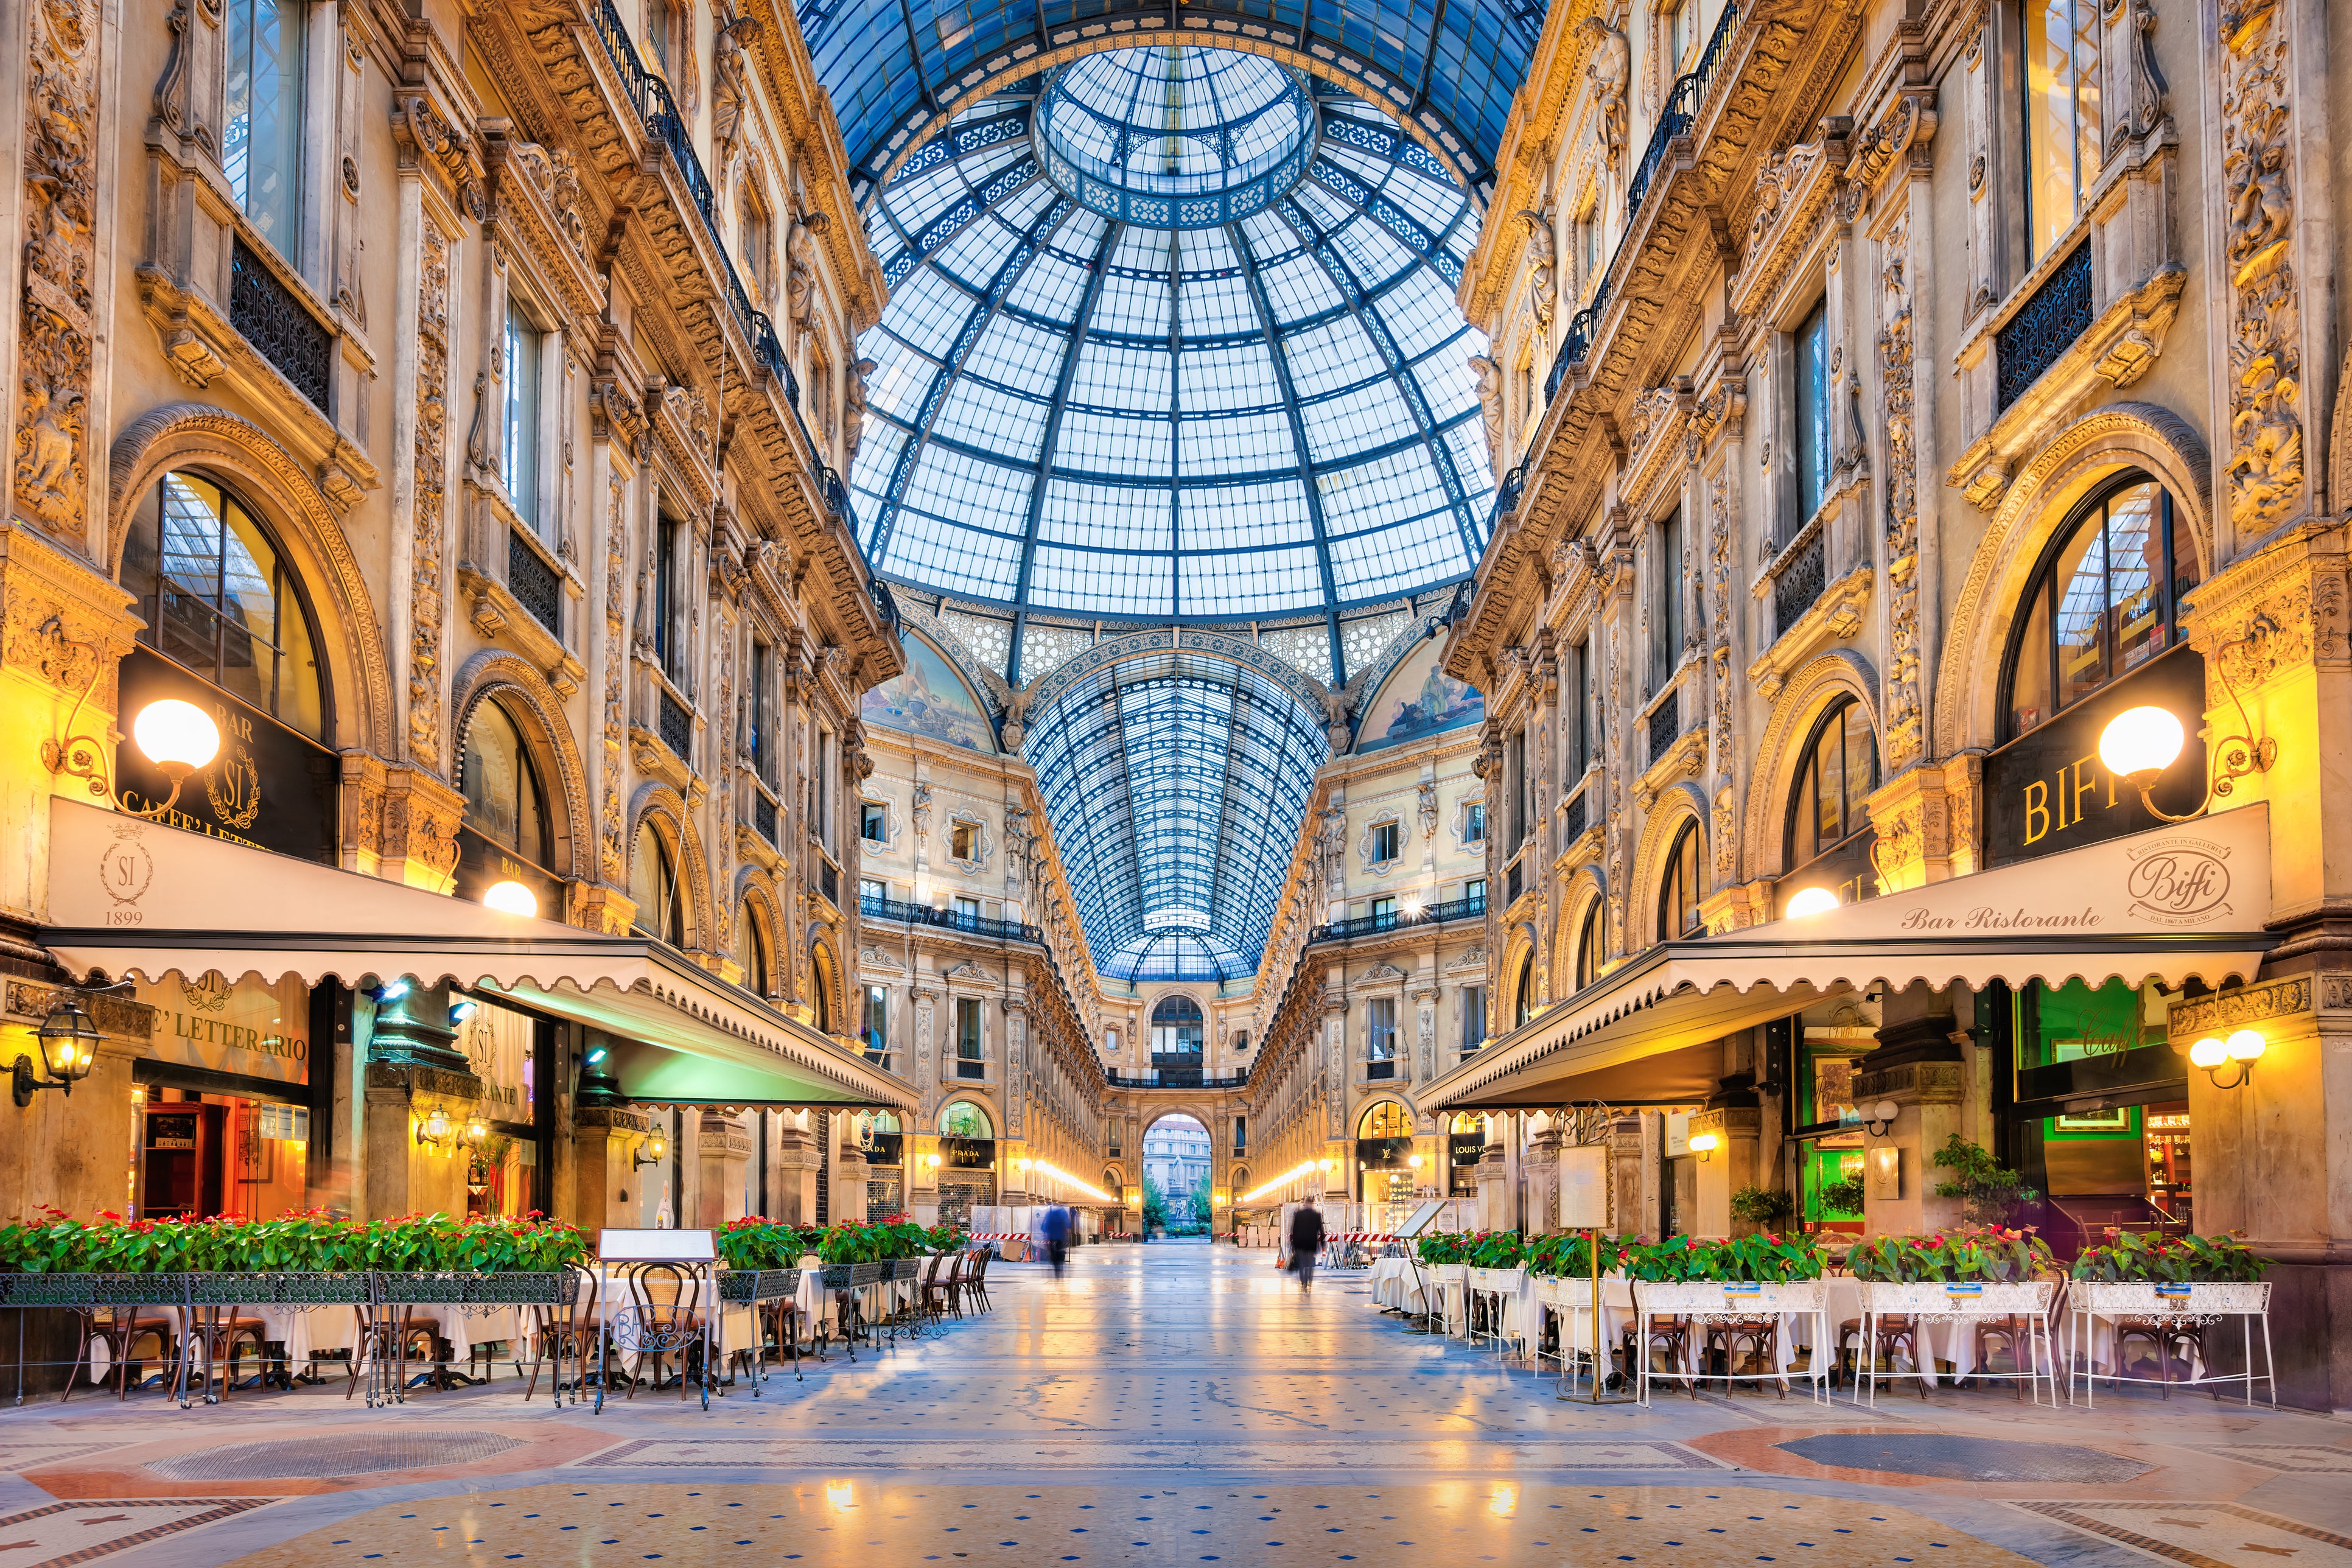 It’s easy to explore Milan’s understated elegance